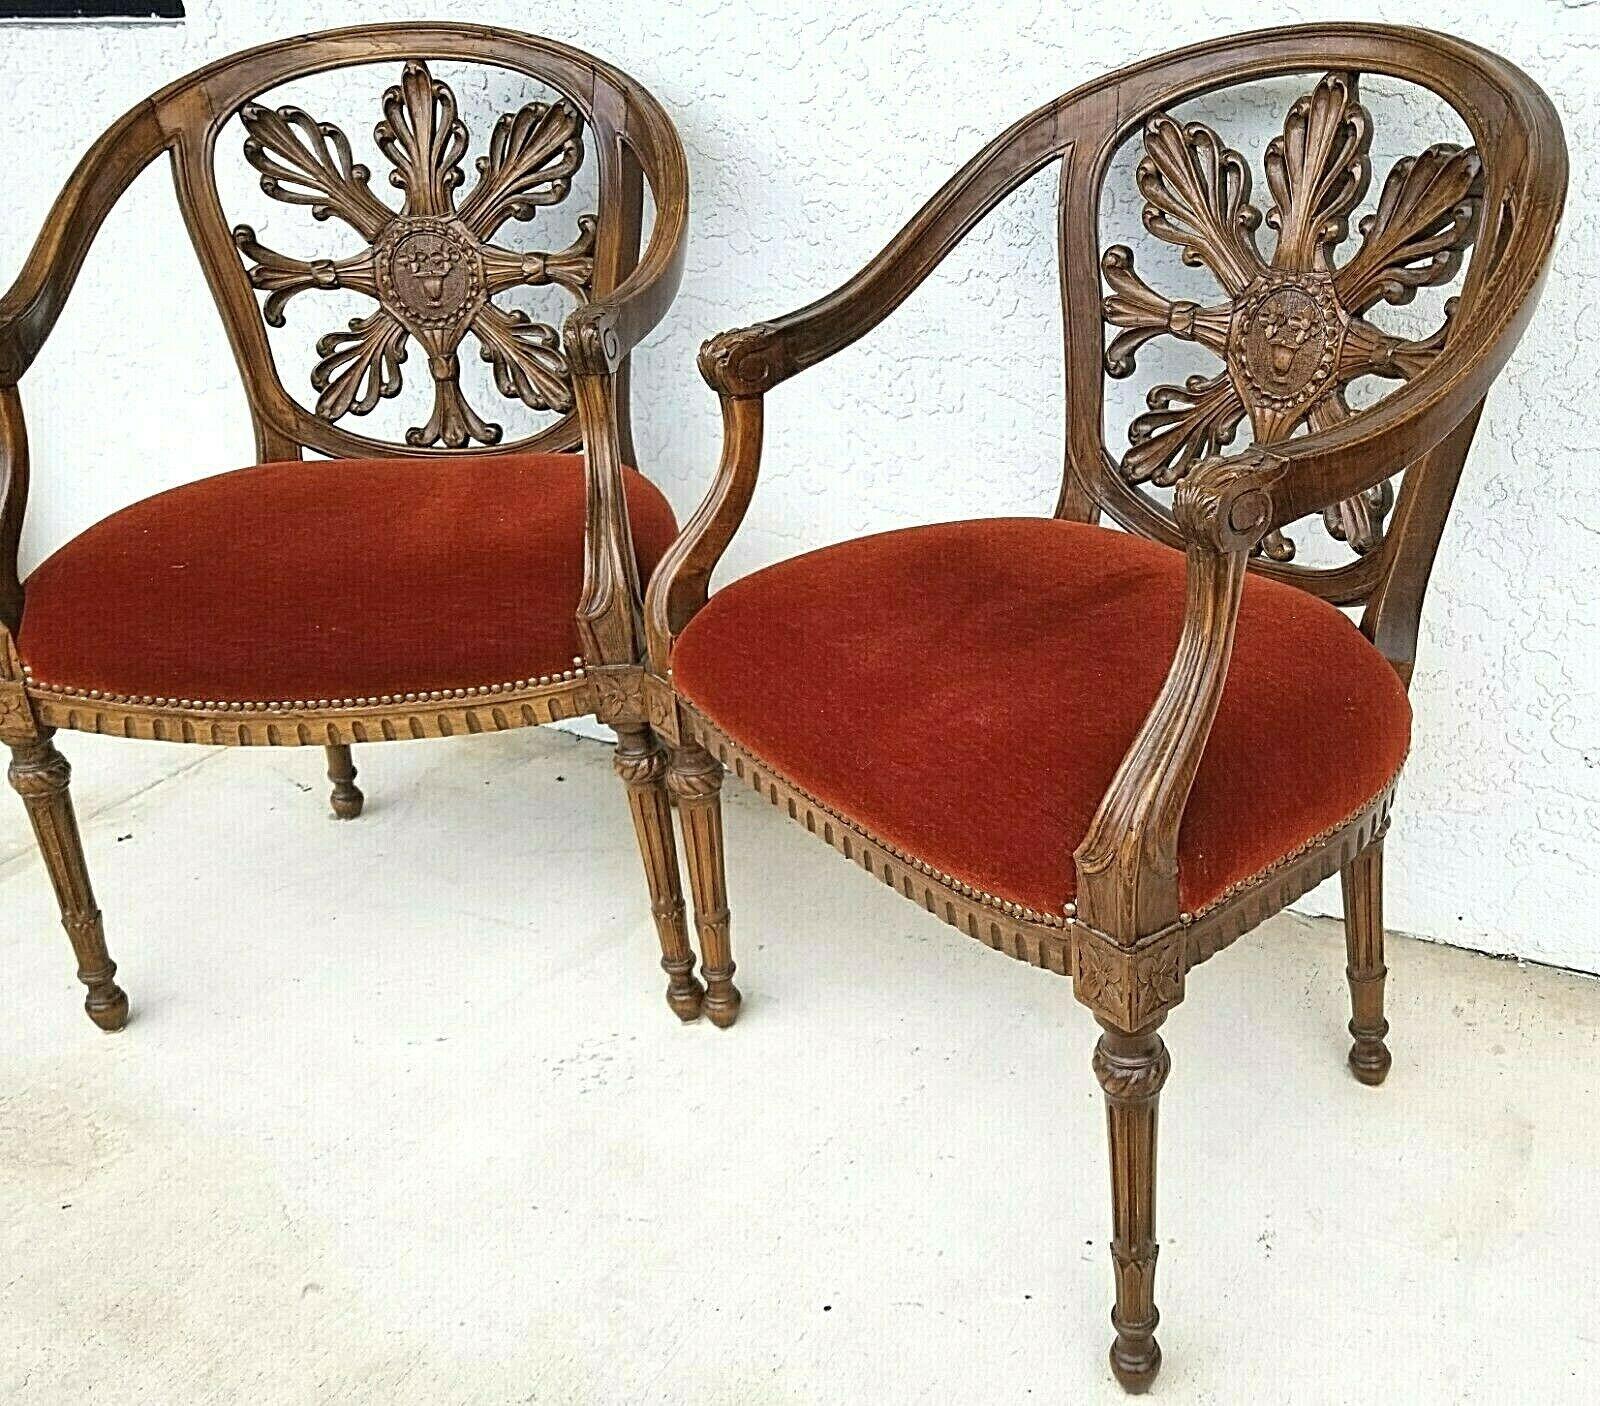 For FULL item description be sure to click on CONTINUE READING at the bottom of this listing.

Offering One Of Our Recent Palm Beach Estate Fine Furniture Acquisitions Of A 
Pair of Antique Early 1900's Hand Carved Walnut French Provincial Accent